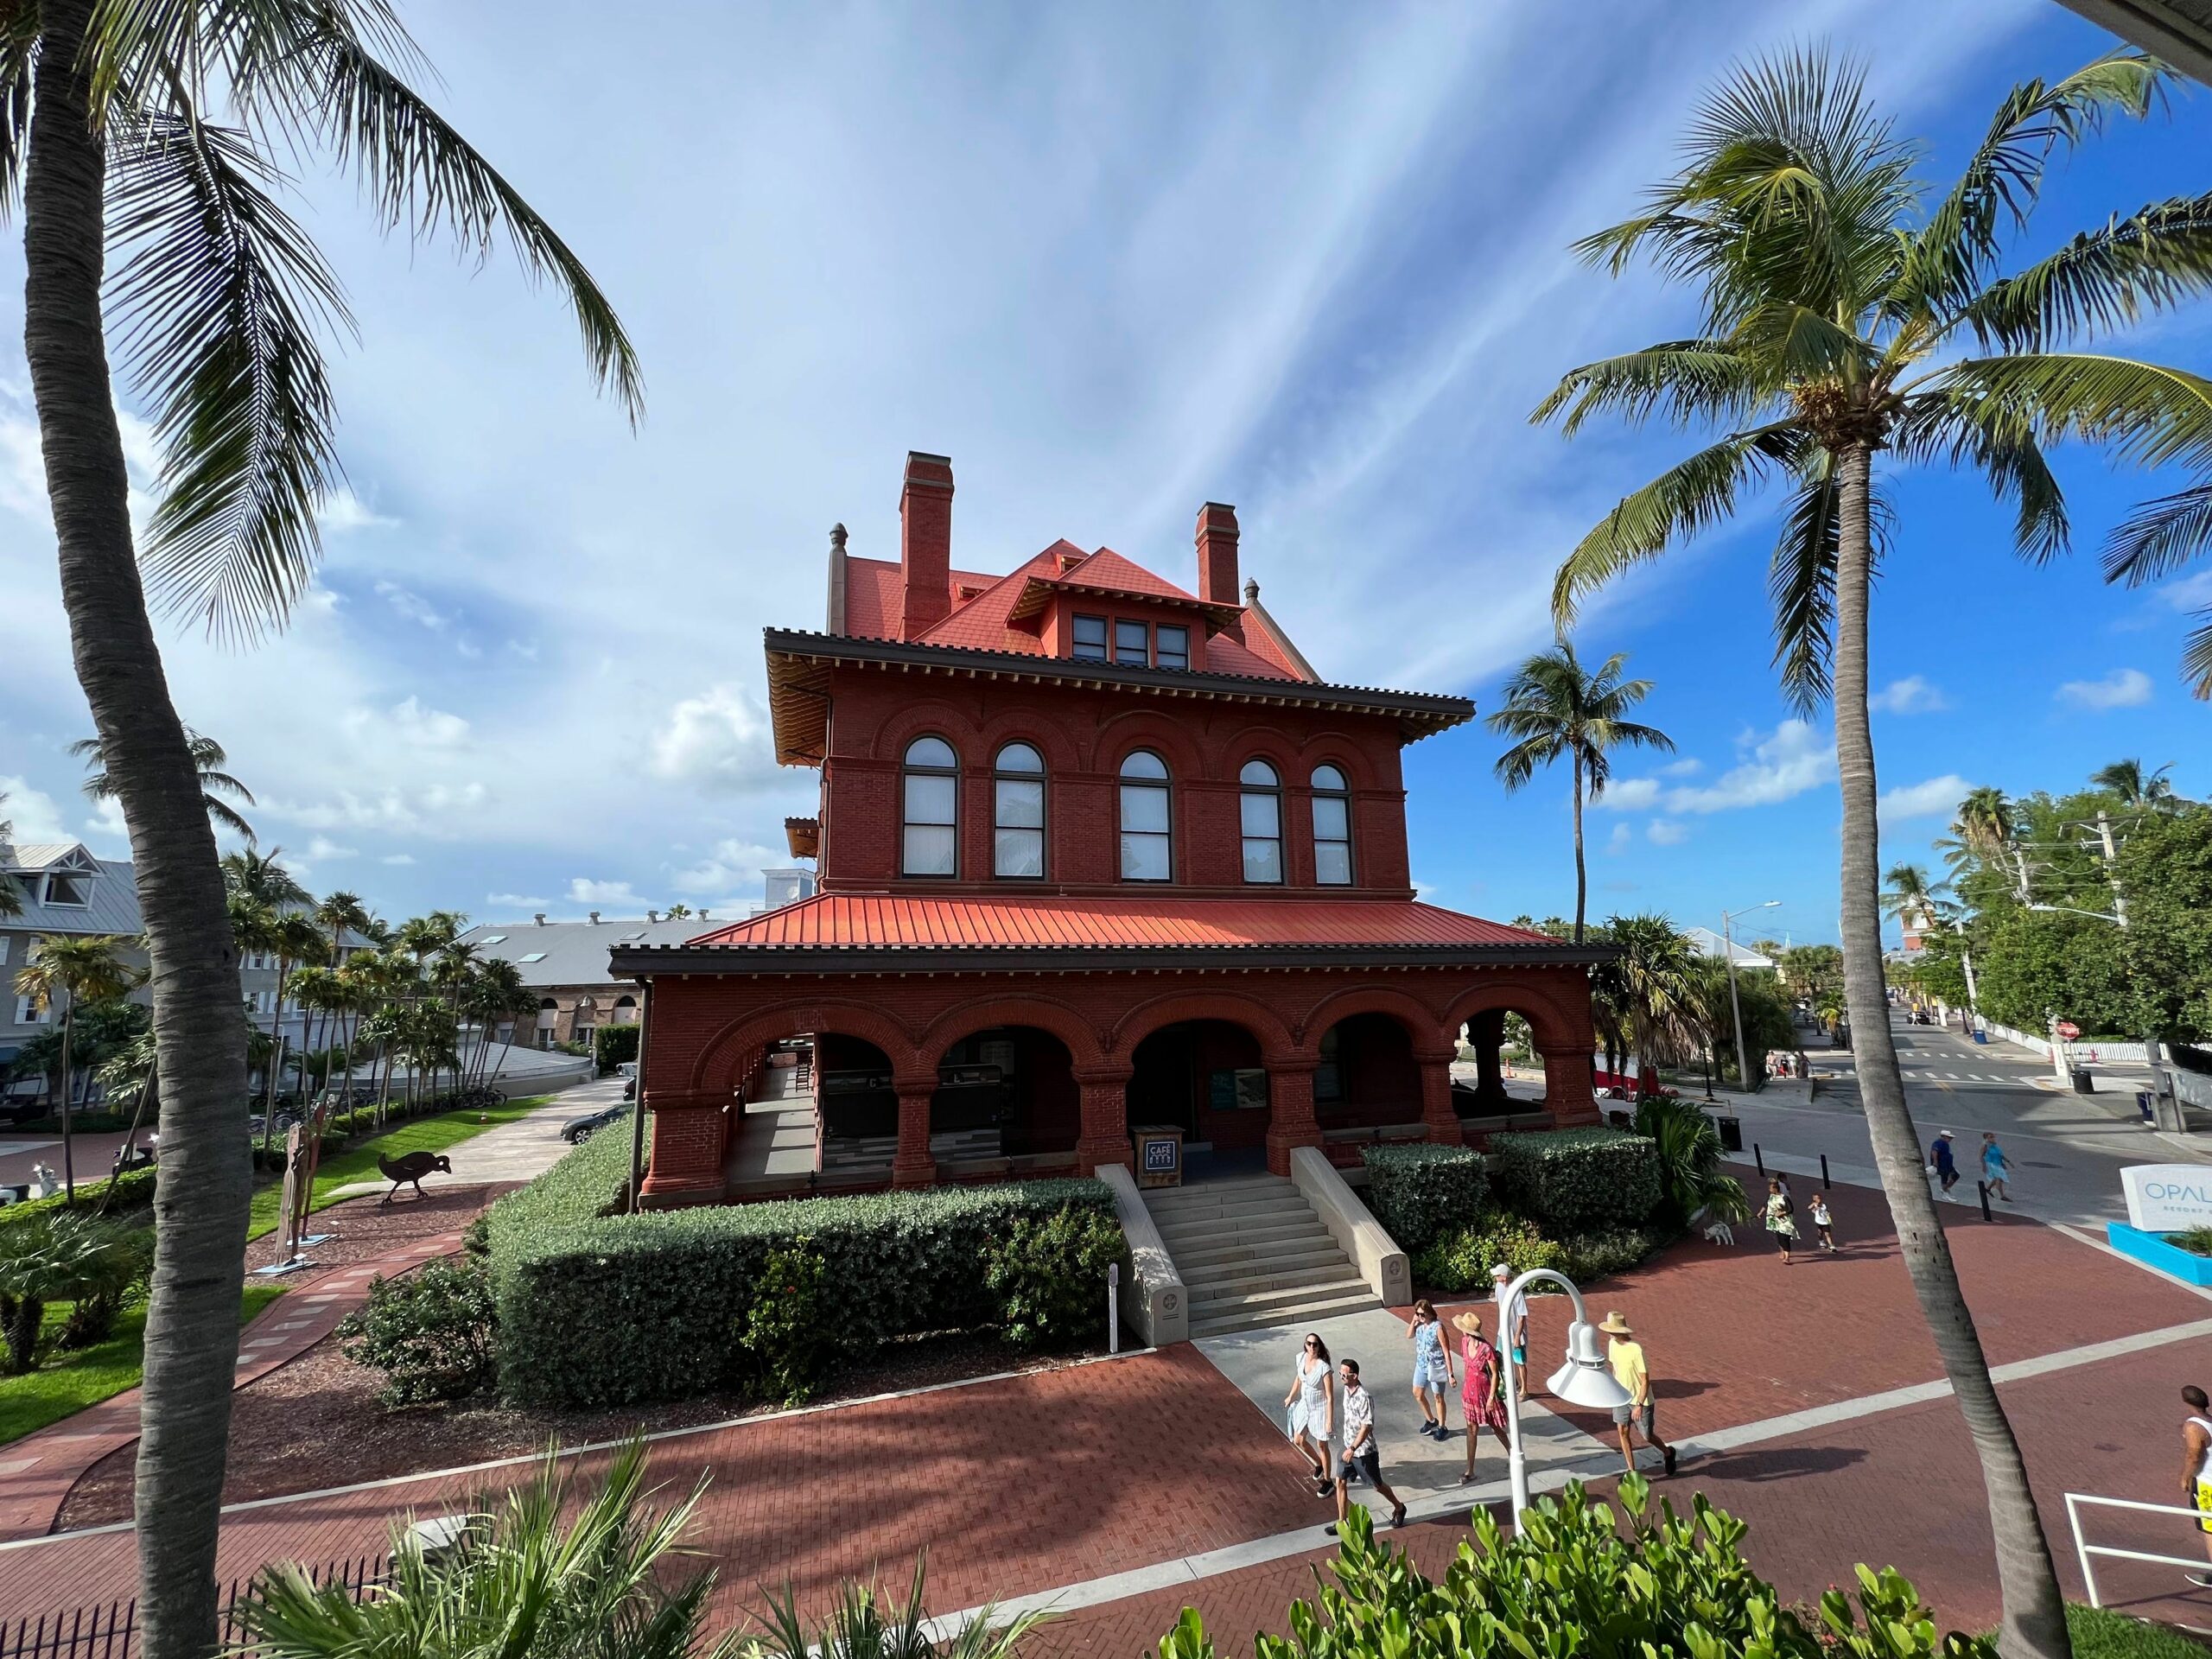 The 19th century Customs House is now the Key West Museum of Art and Heritage. Photo by Bill Kress.